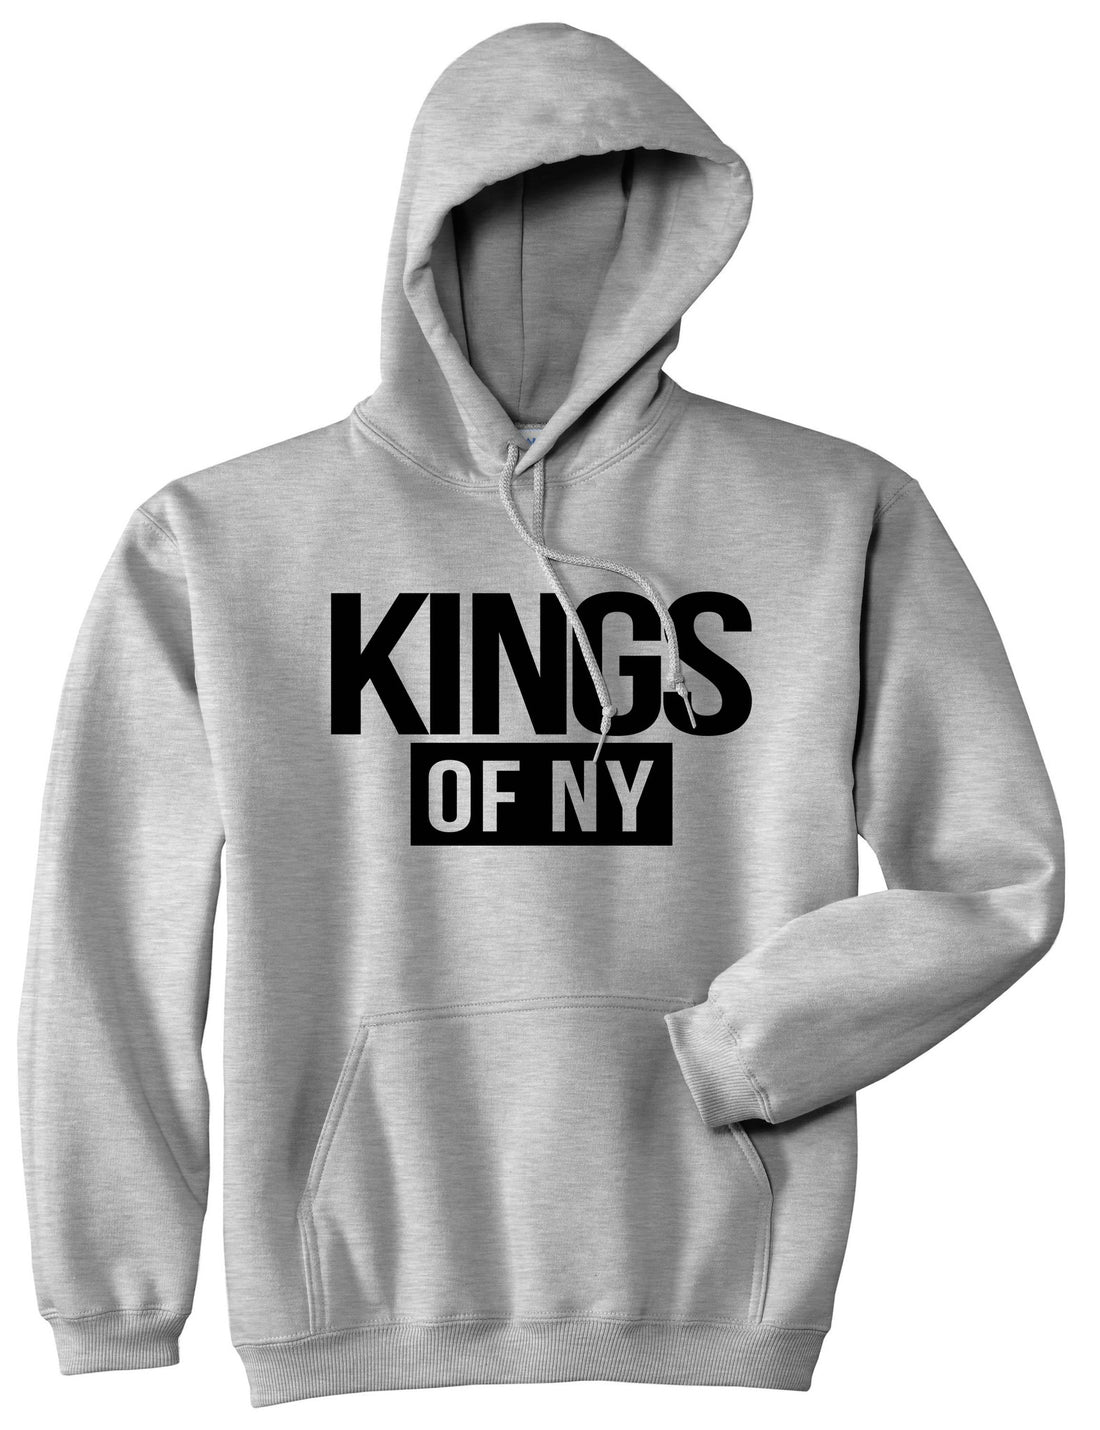 Kings Of NY Logo W15 Pullover Hoodie in Grey By Kings Of NY